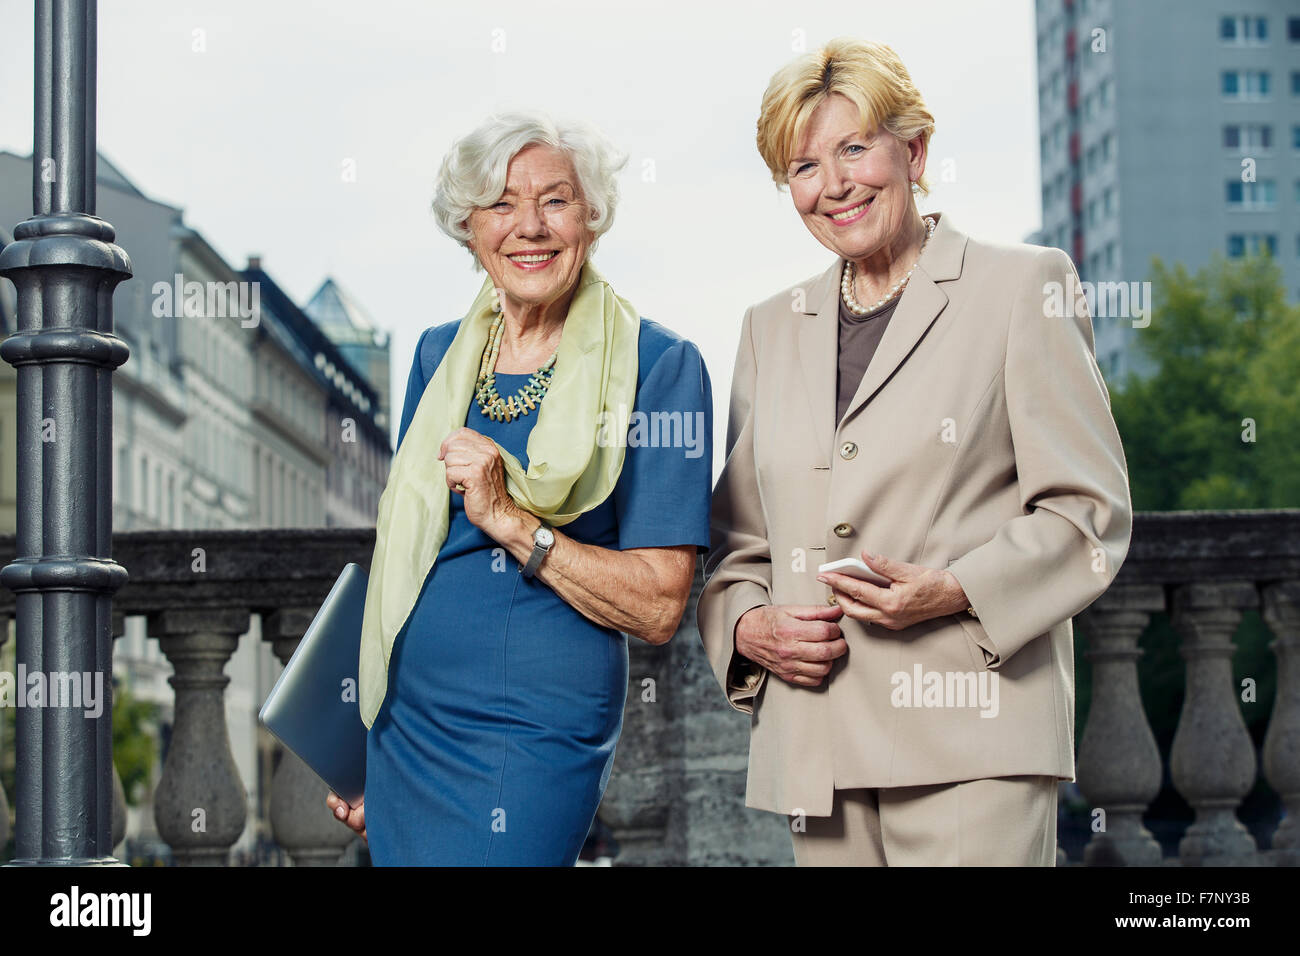 Germany, Berlin, portrait of two smiling senior businesswomen with laptop and smartphone Stock Photo